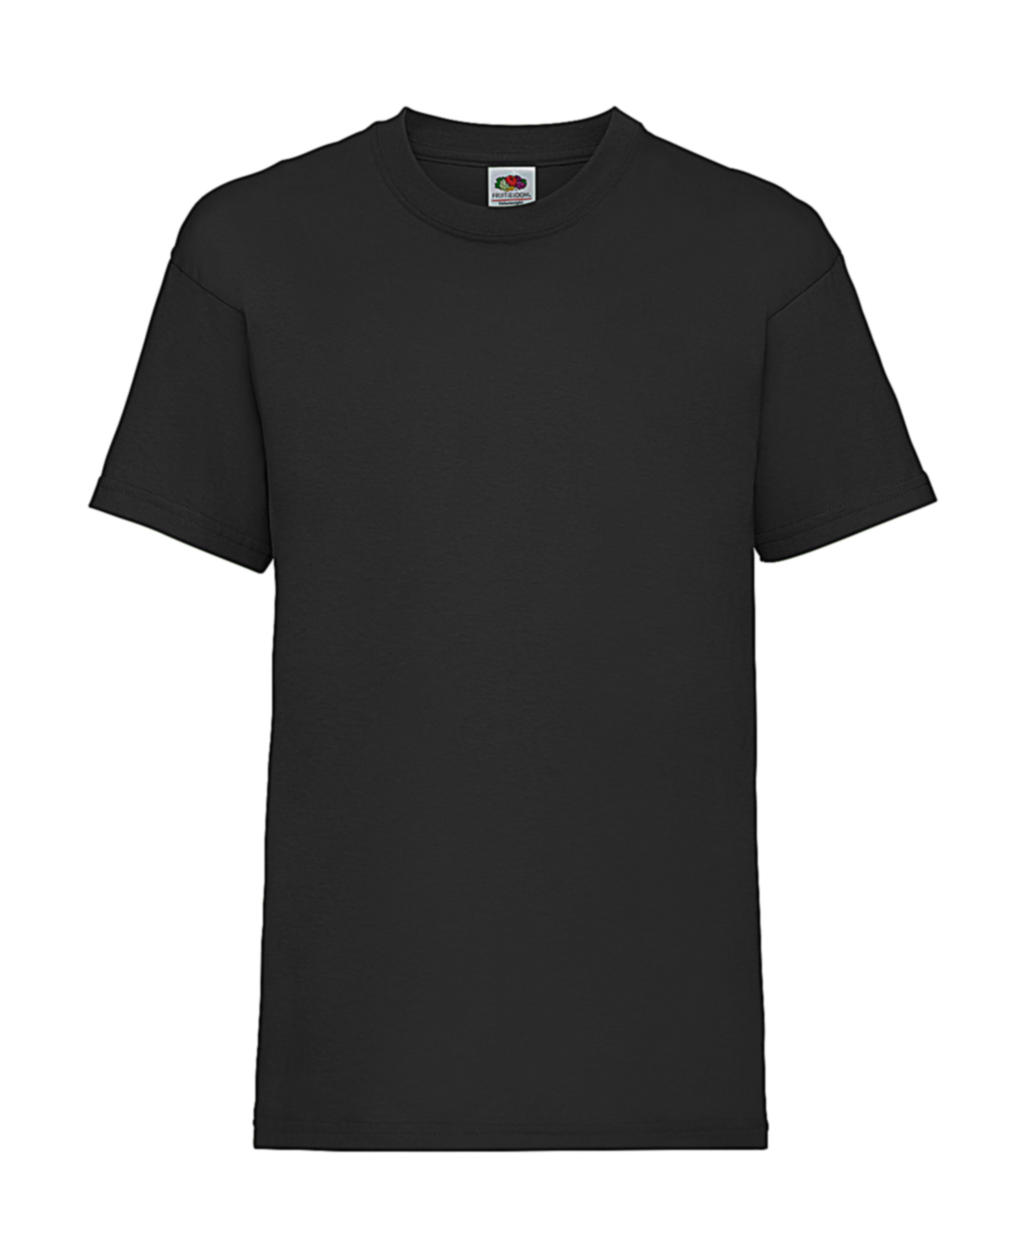  Kids Valueweight T in Farbe Black